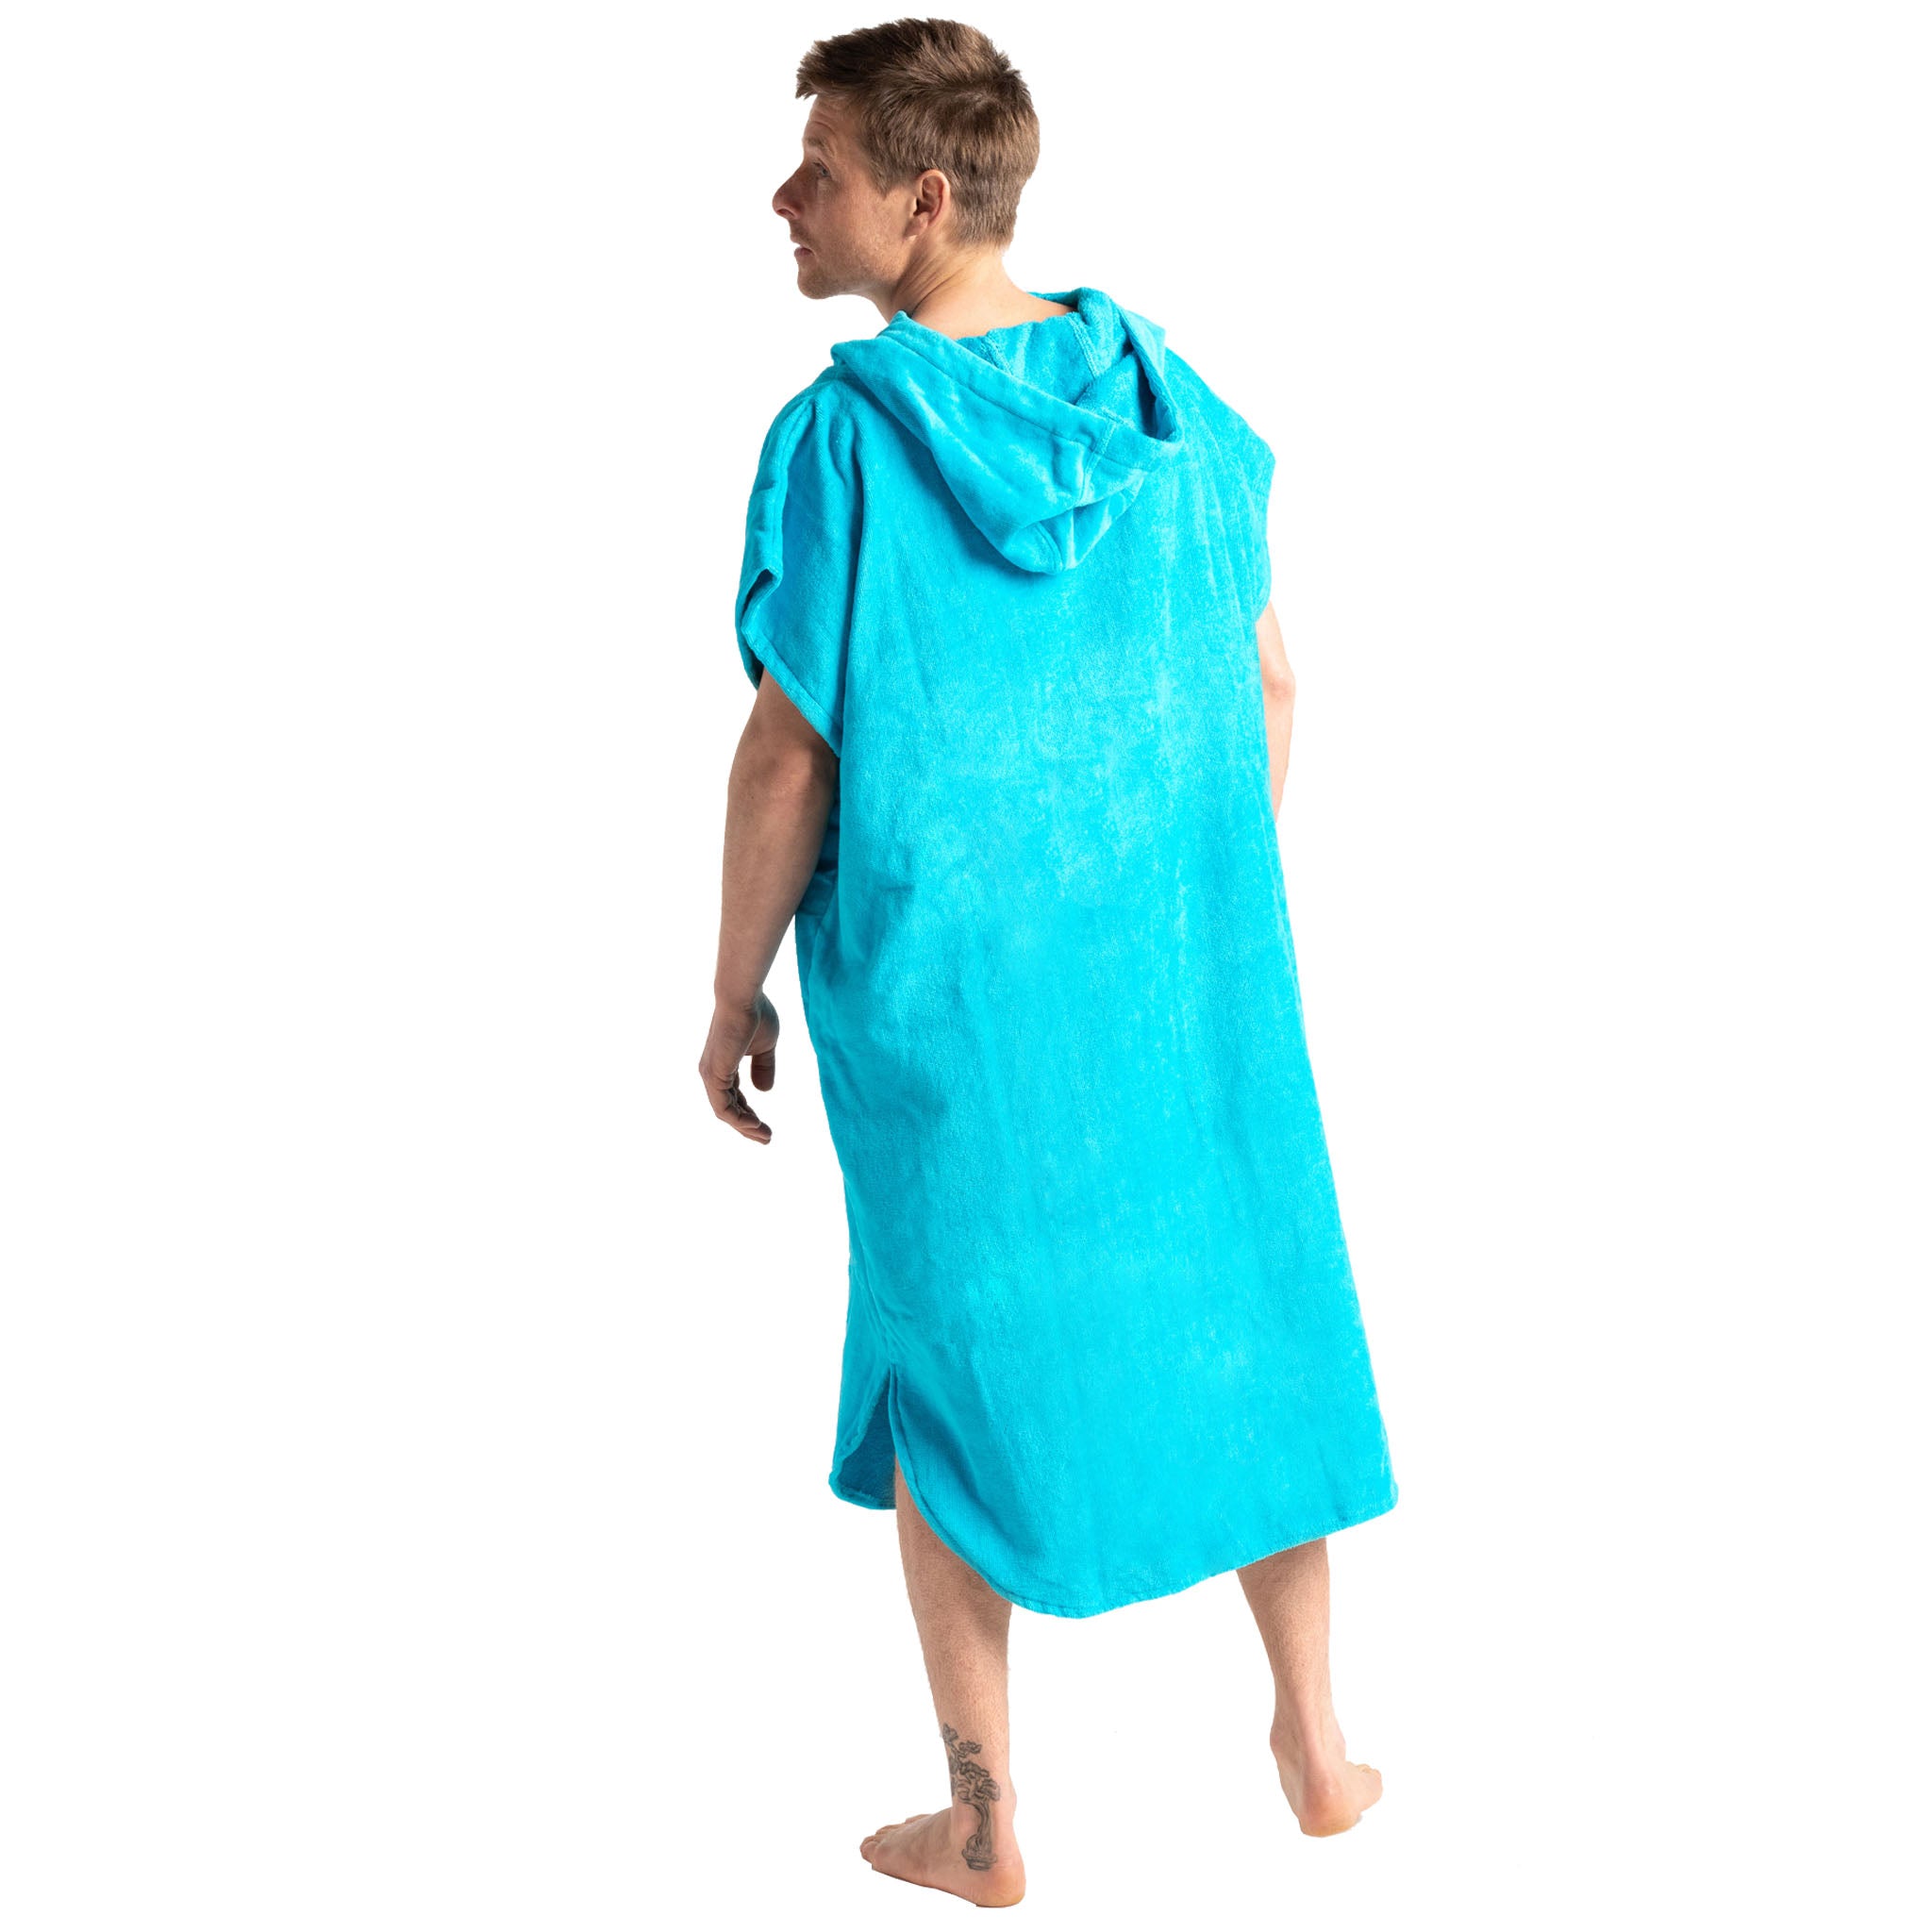 Robie Robes Original Towelling Beach Changing Robe Poncho - Blue Atoll Back